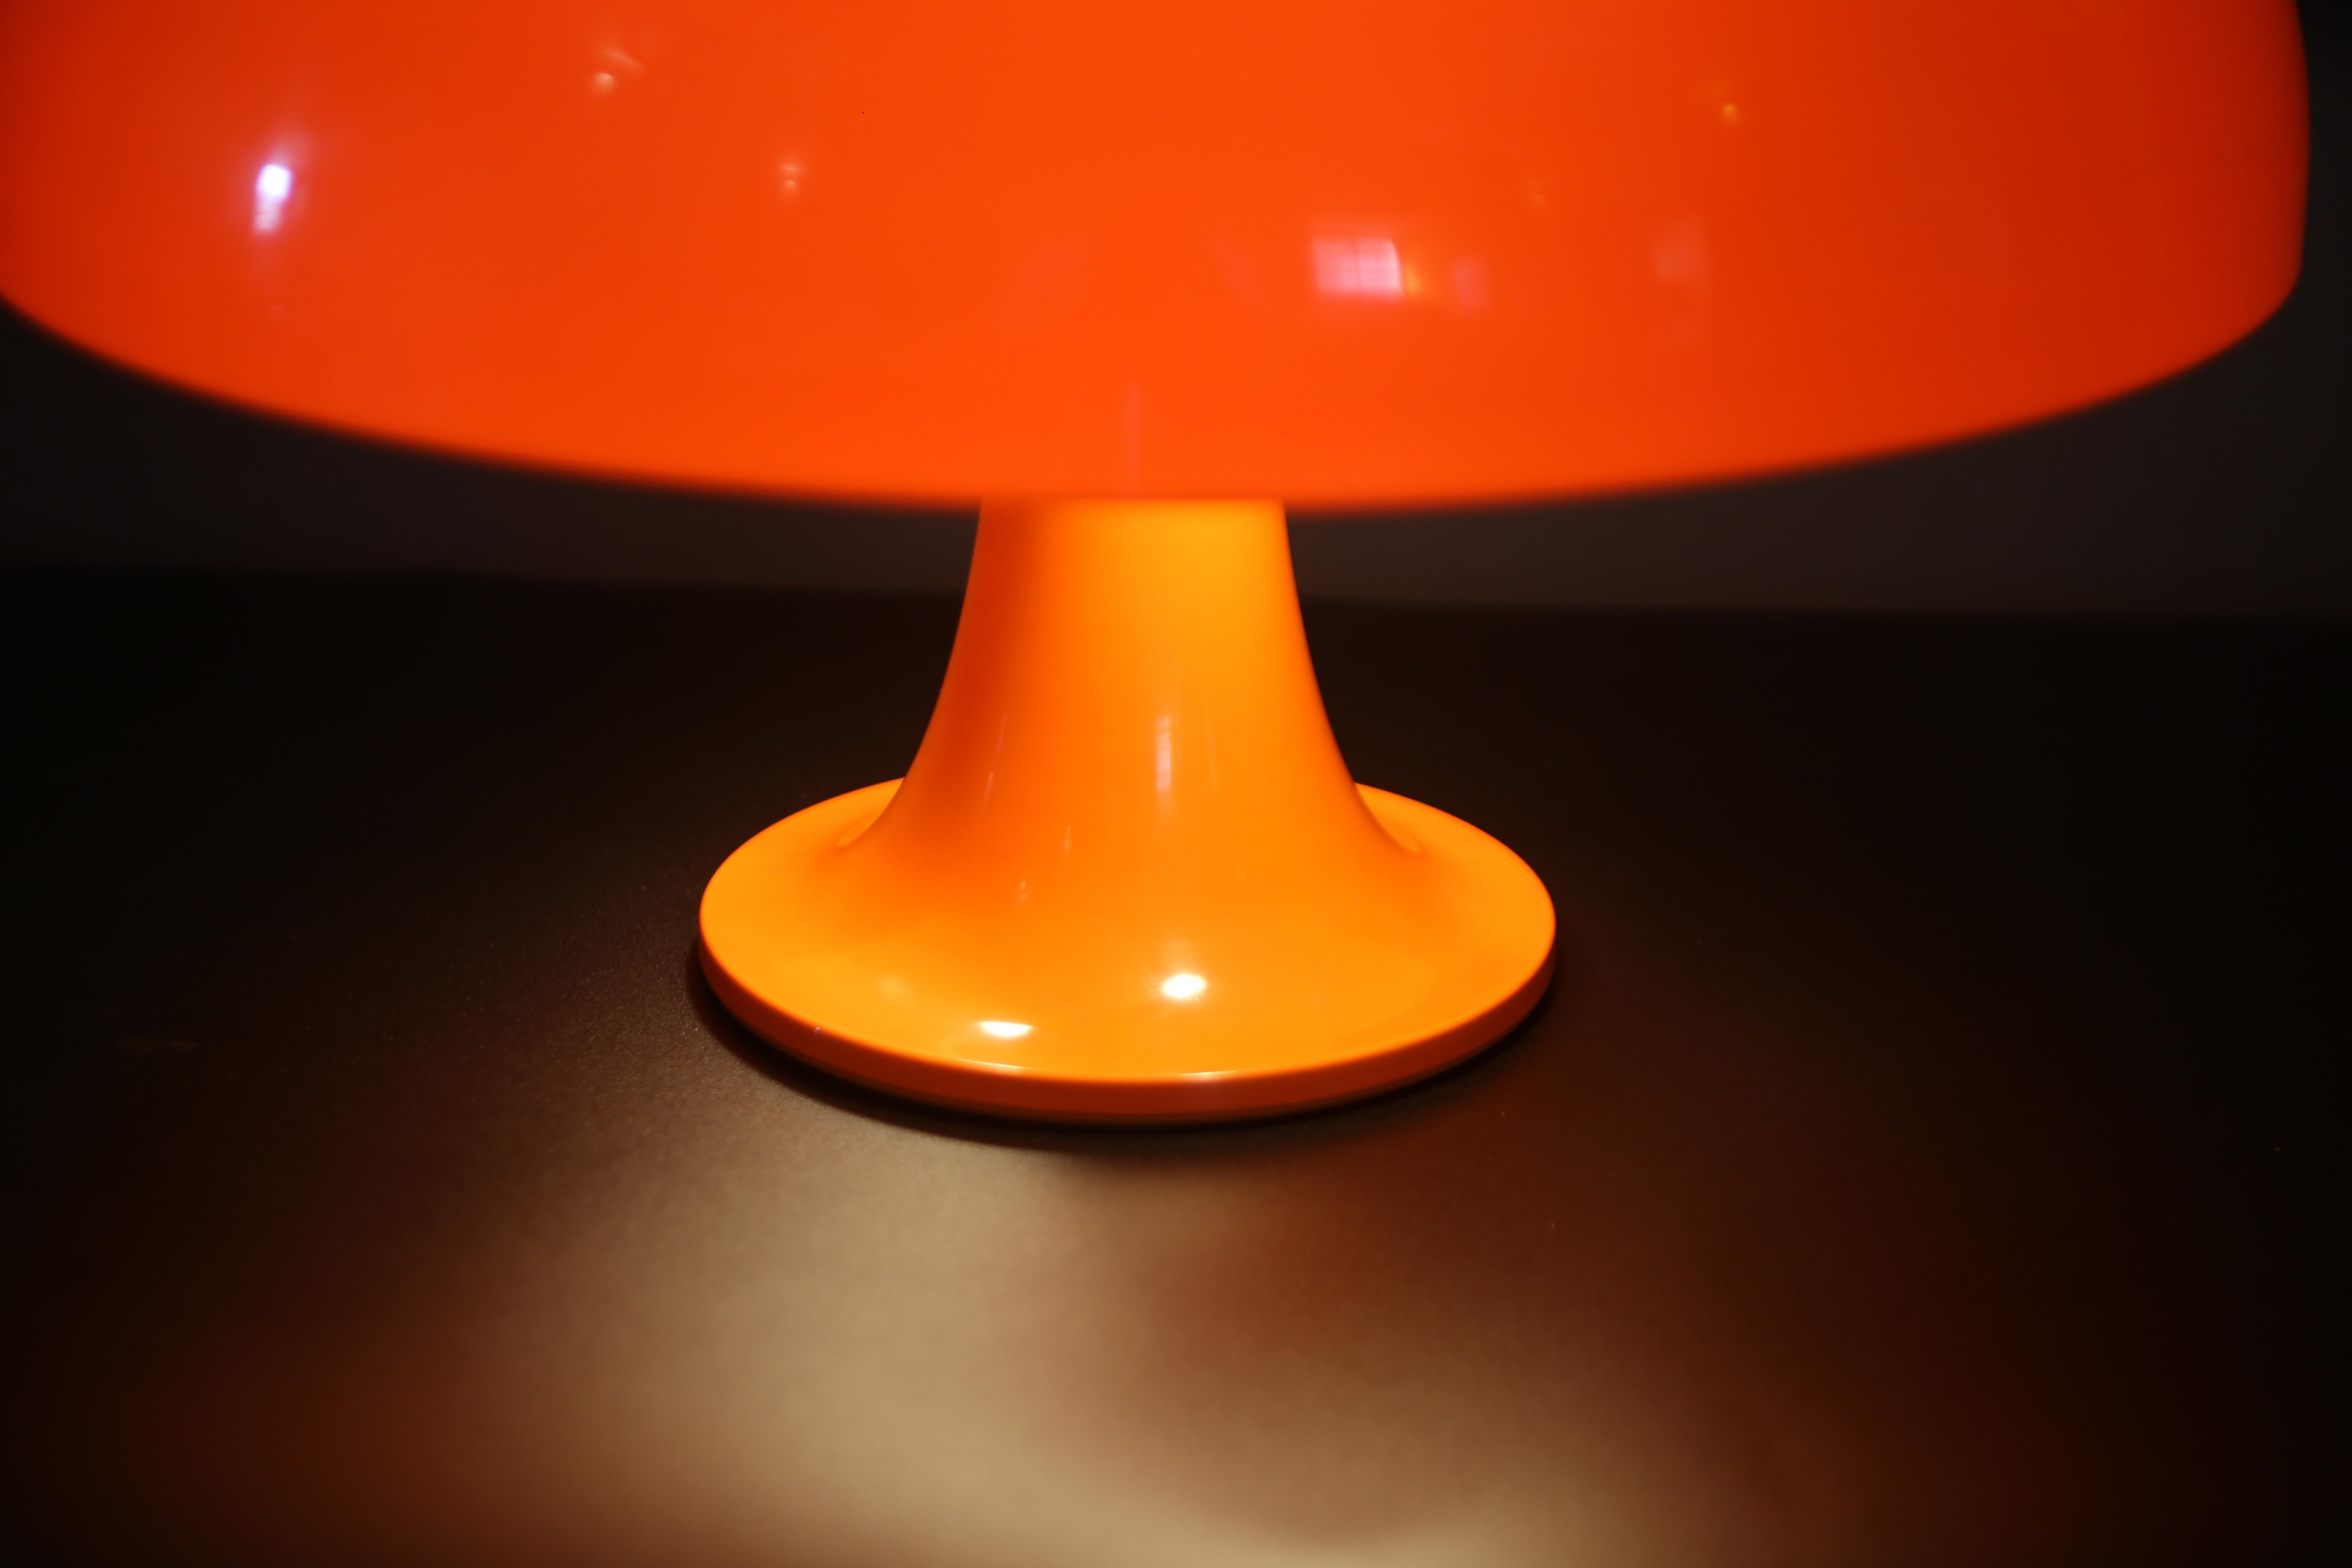 Mid-Century Modern Giancarlo Mattioli  Nesso table lamp first edition artemide production 1960.